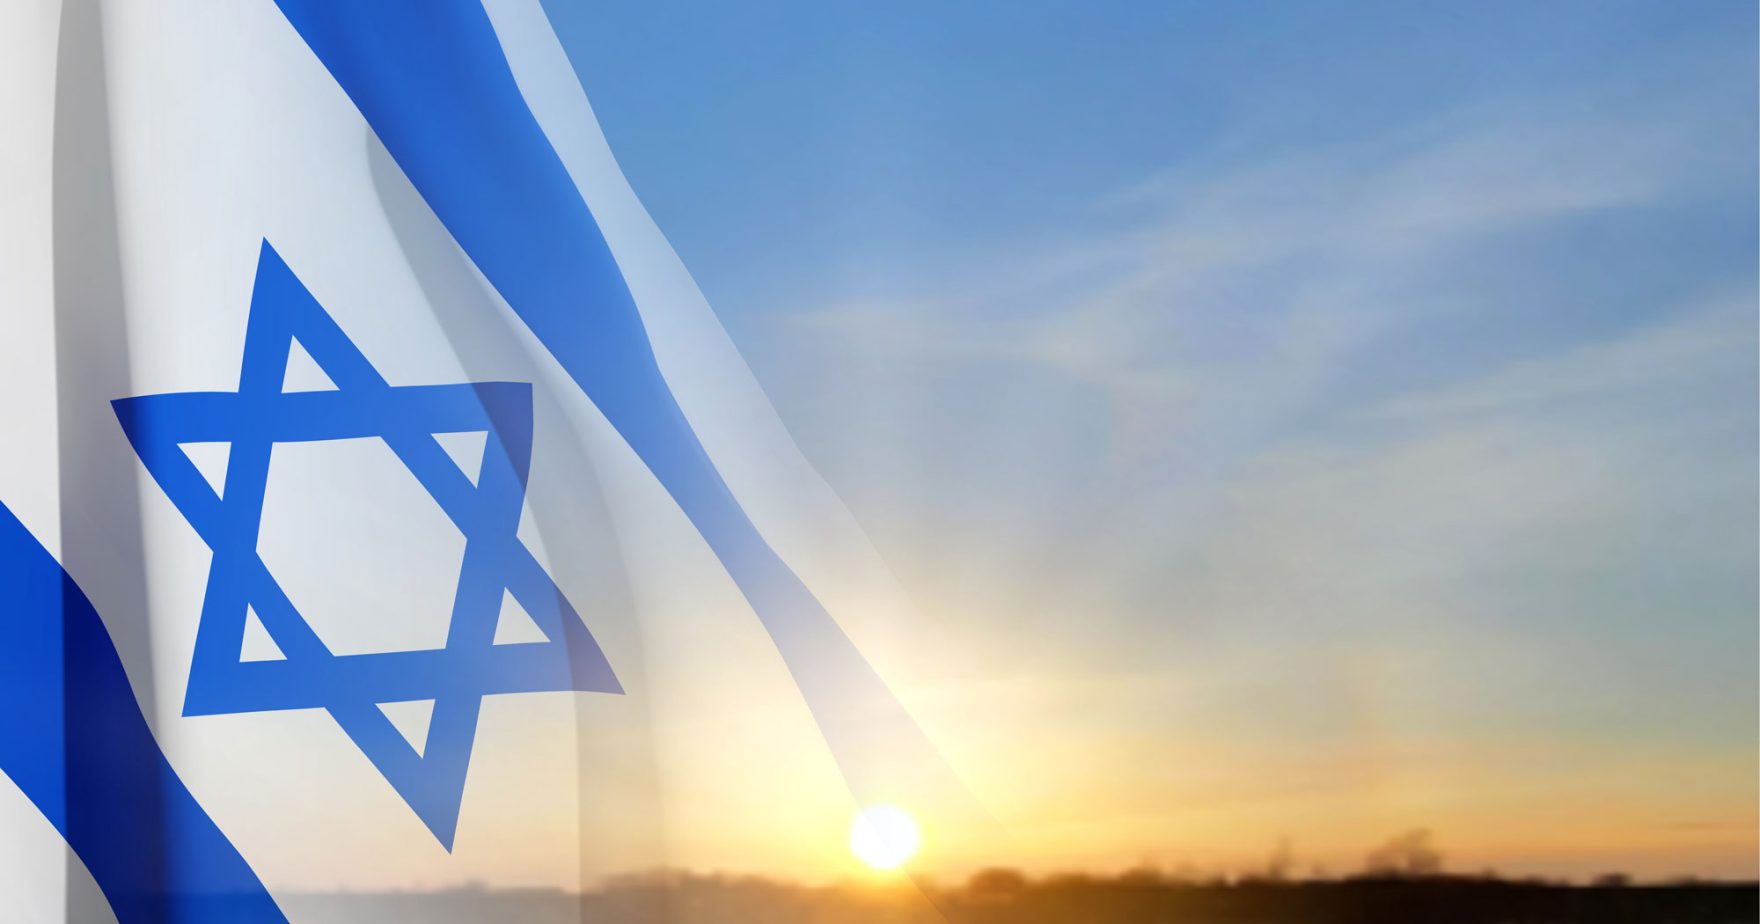 A photo of Israel's national flag crossfaded with a sunrise: Learn more about Regent University’s Statement on Antisemitism